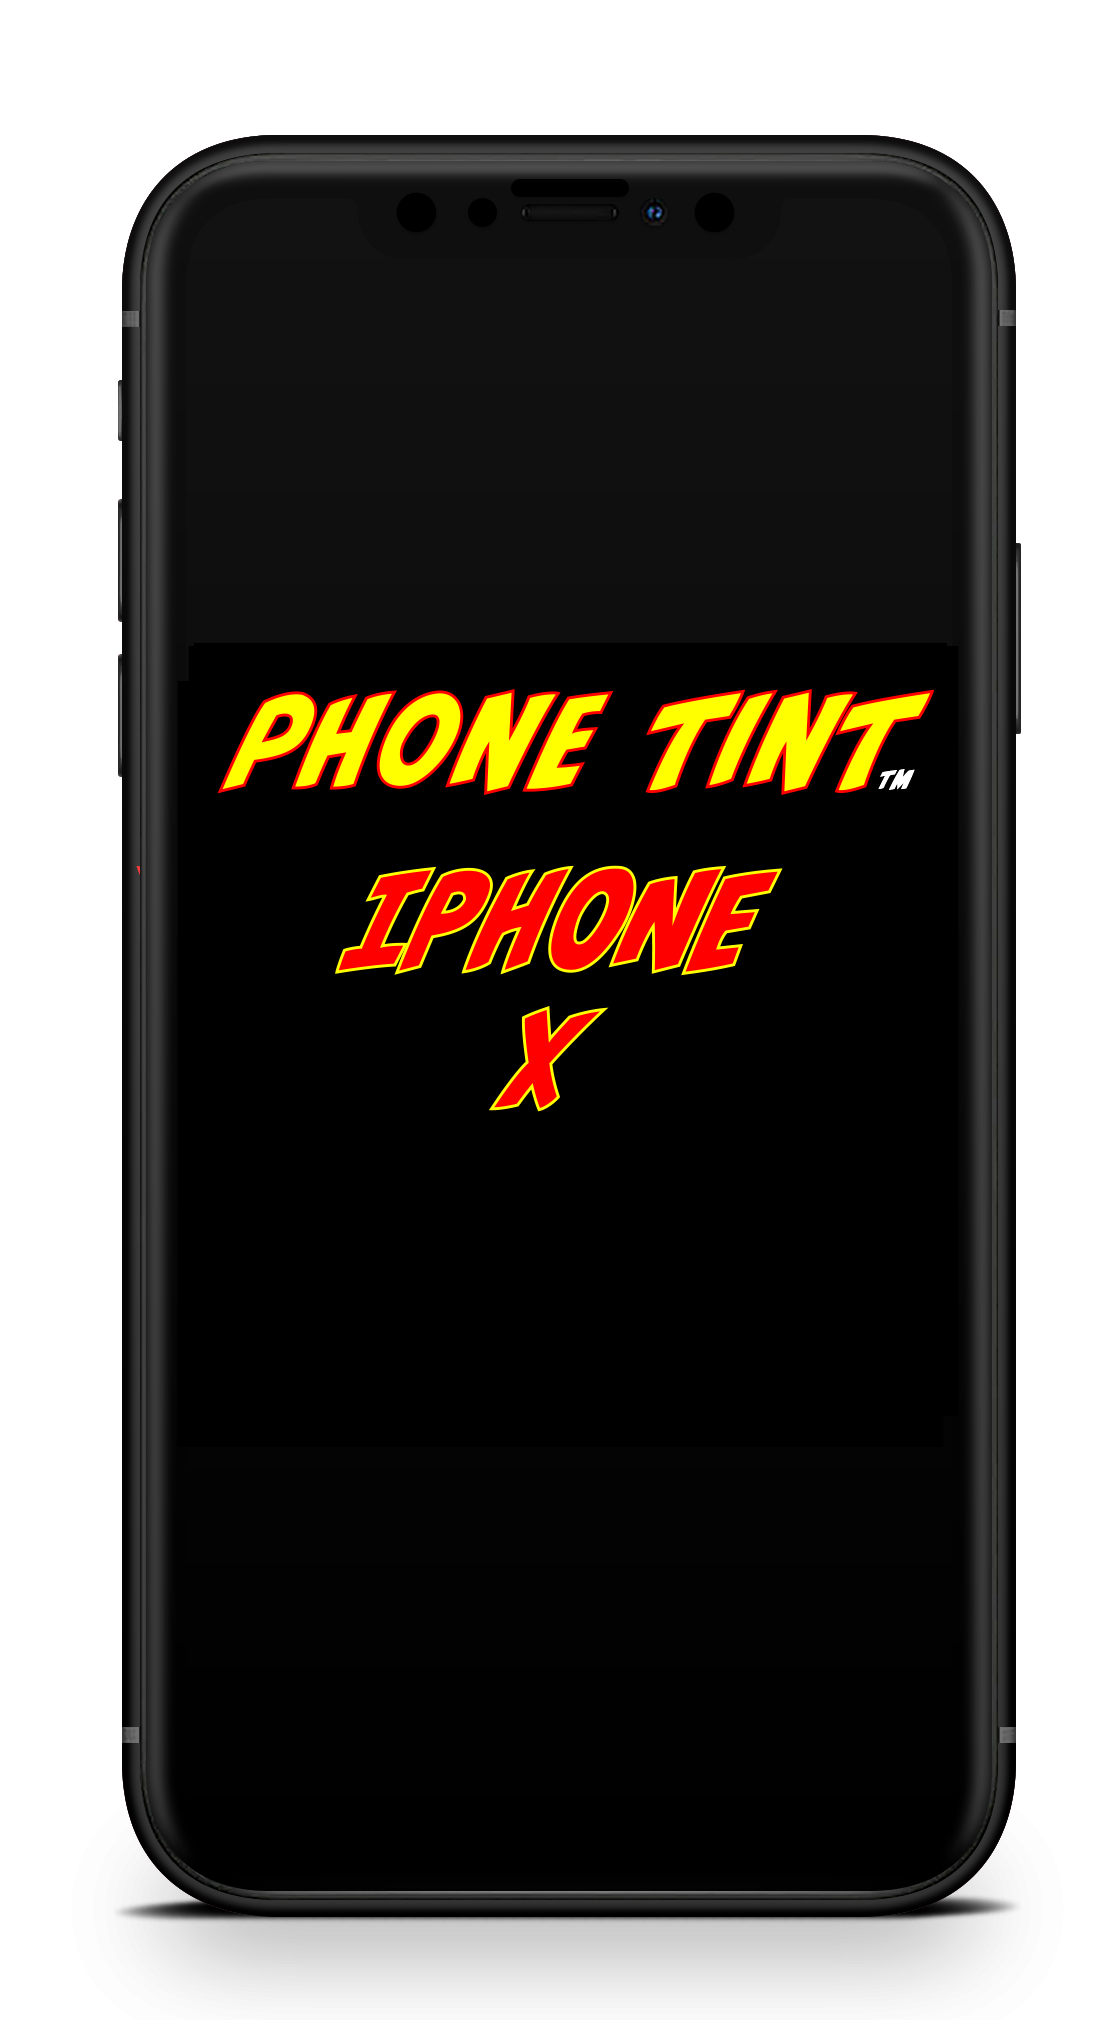 Iphone x phone tint privacy edge to edge tempered glass screen protector. SKINZ Edmonton